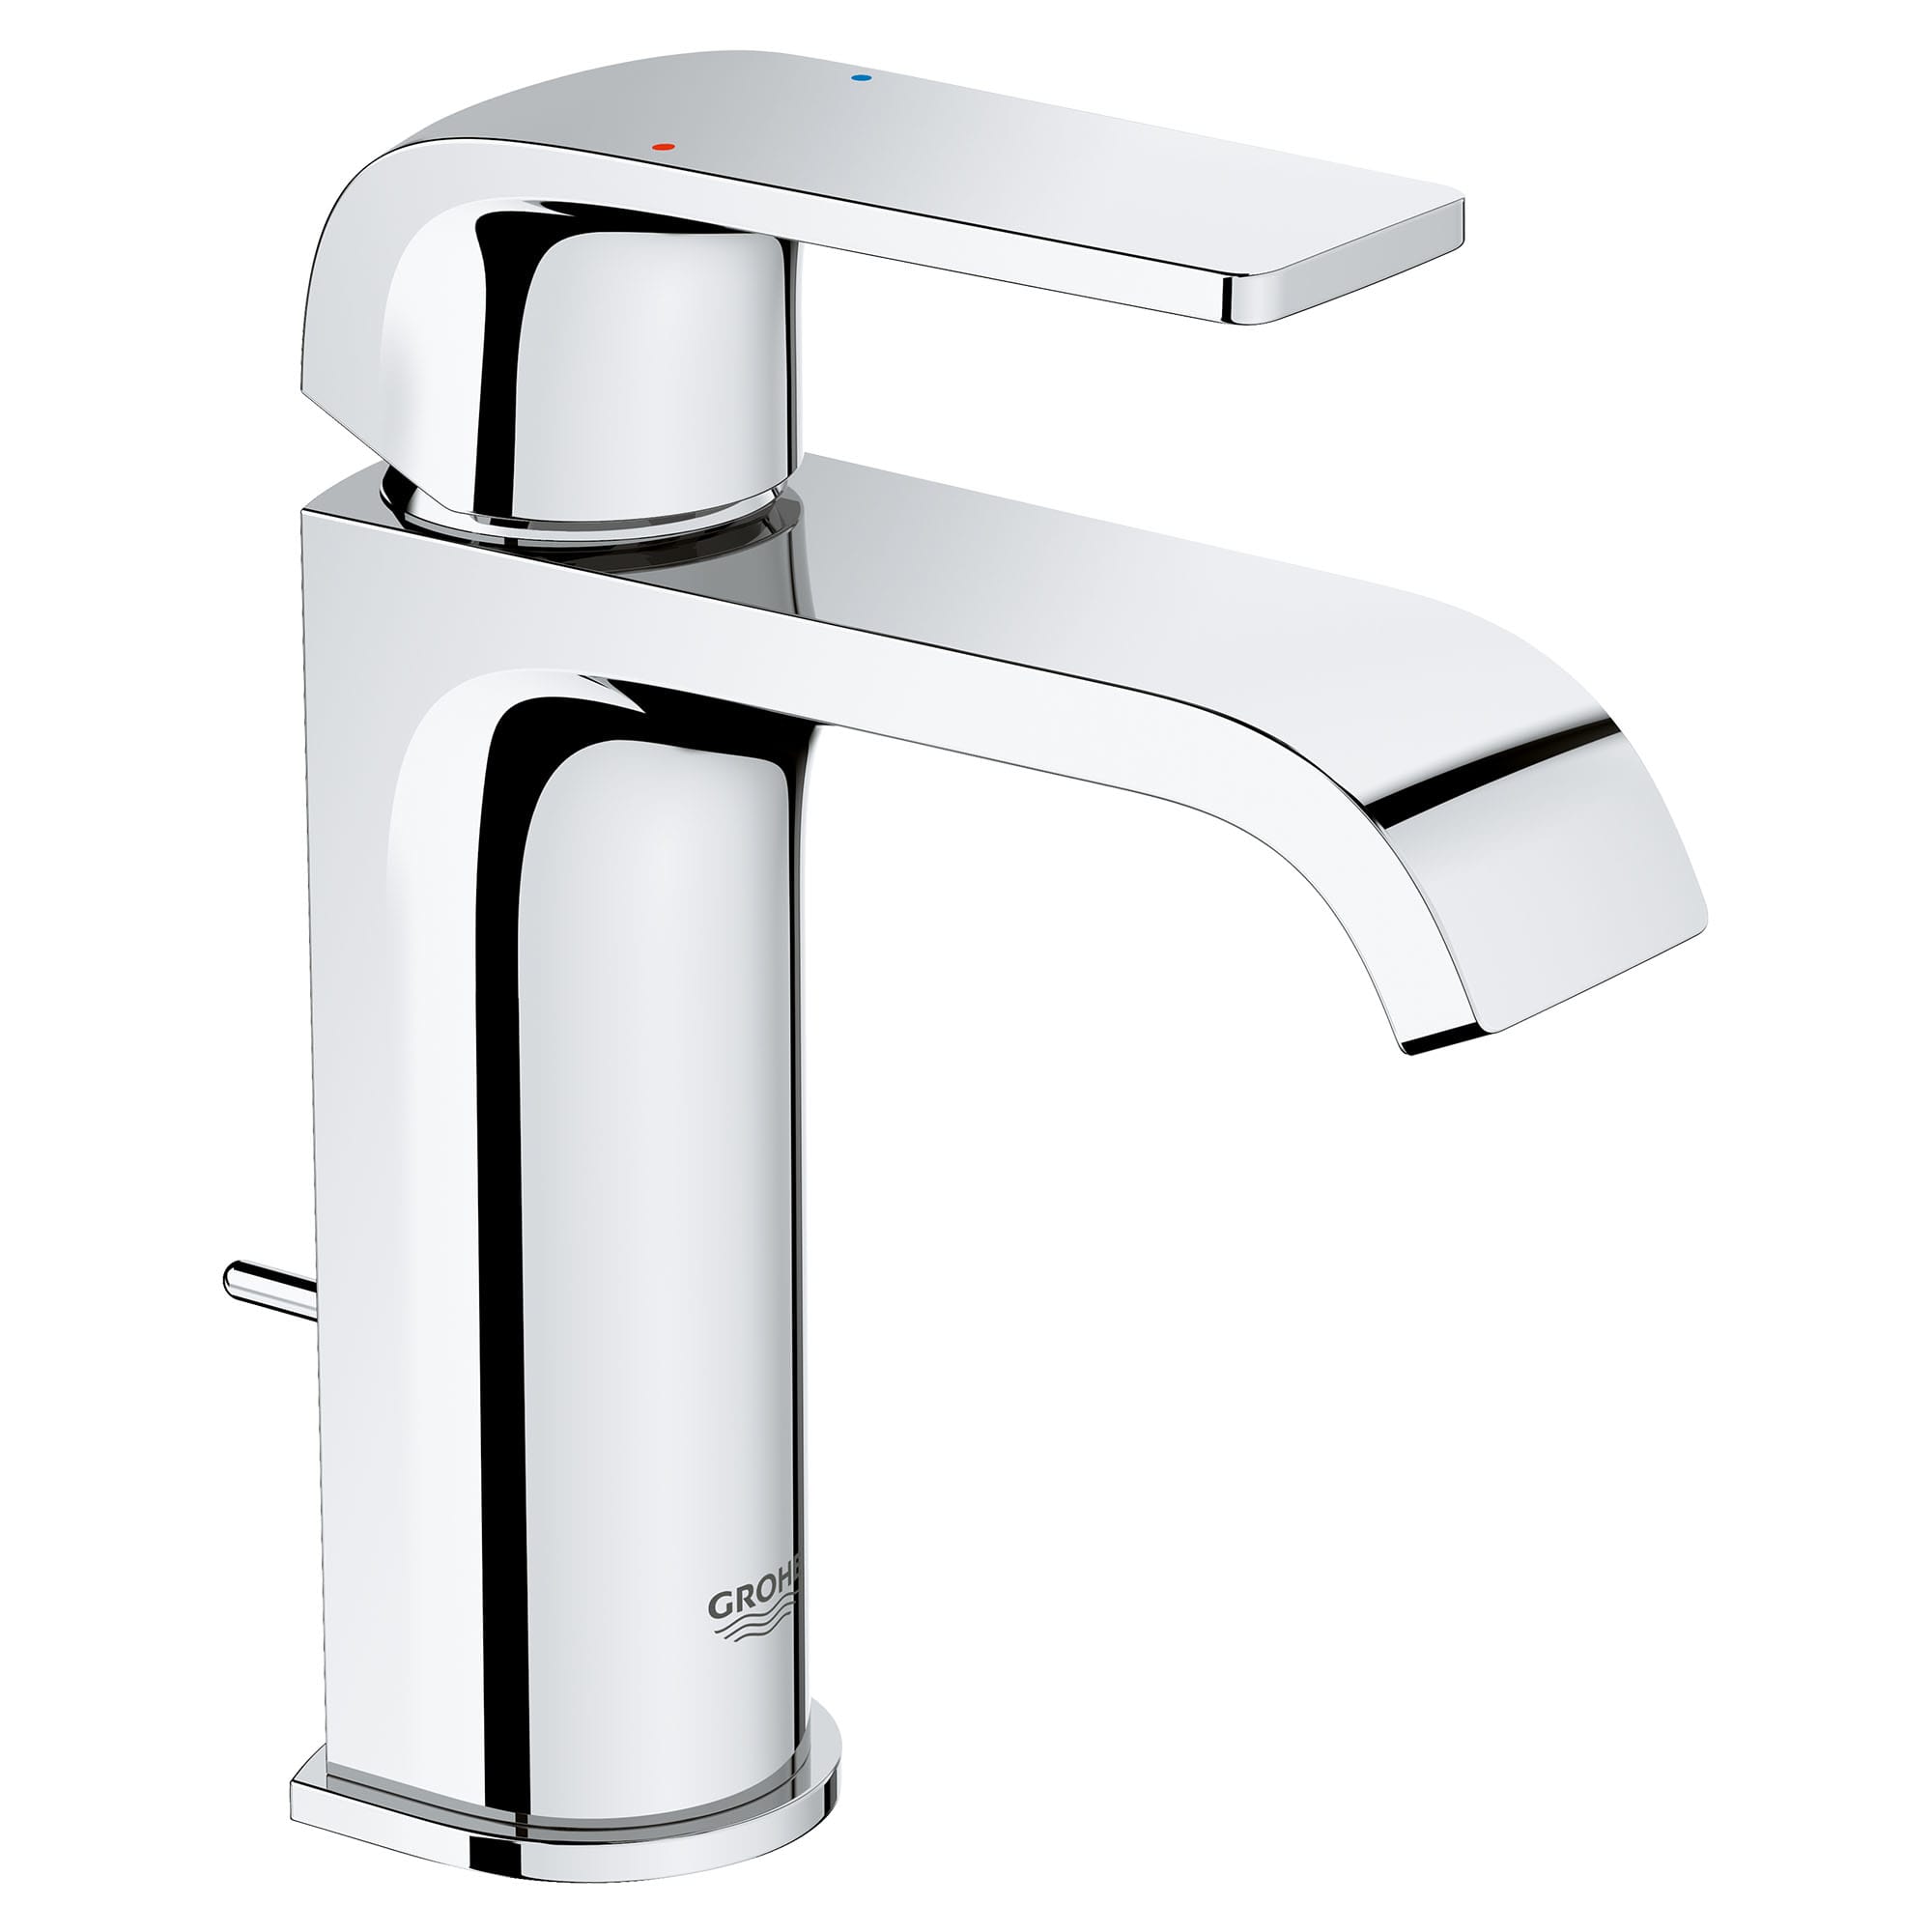 stout Bijproduct Score Grohe 23868000 Starlight Chrome Defined 1.2 GPM Single Hole Bathroom Faucet  with Pop-Up Drain Assembly, SilkMove and EcoJoy Technologies -  FaucetDirect.com